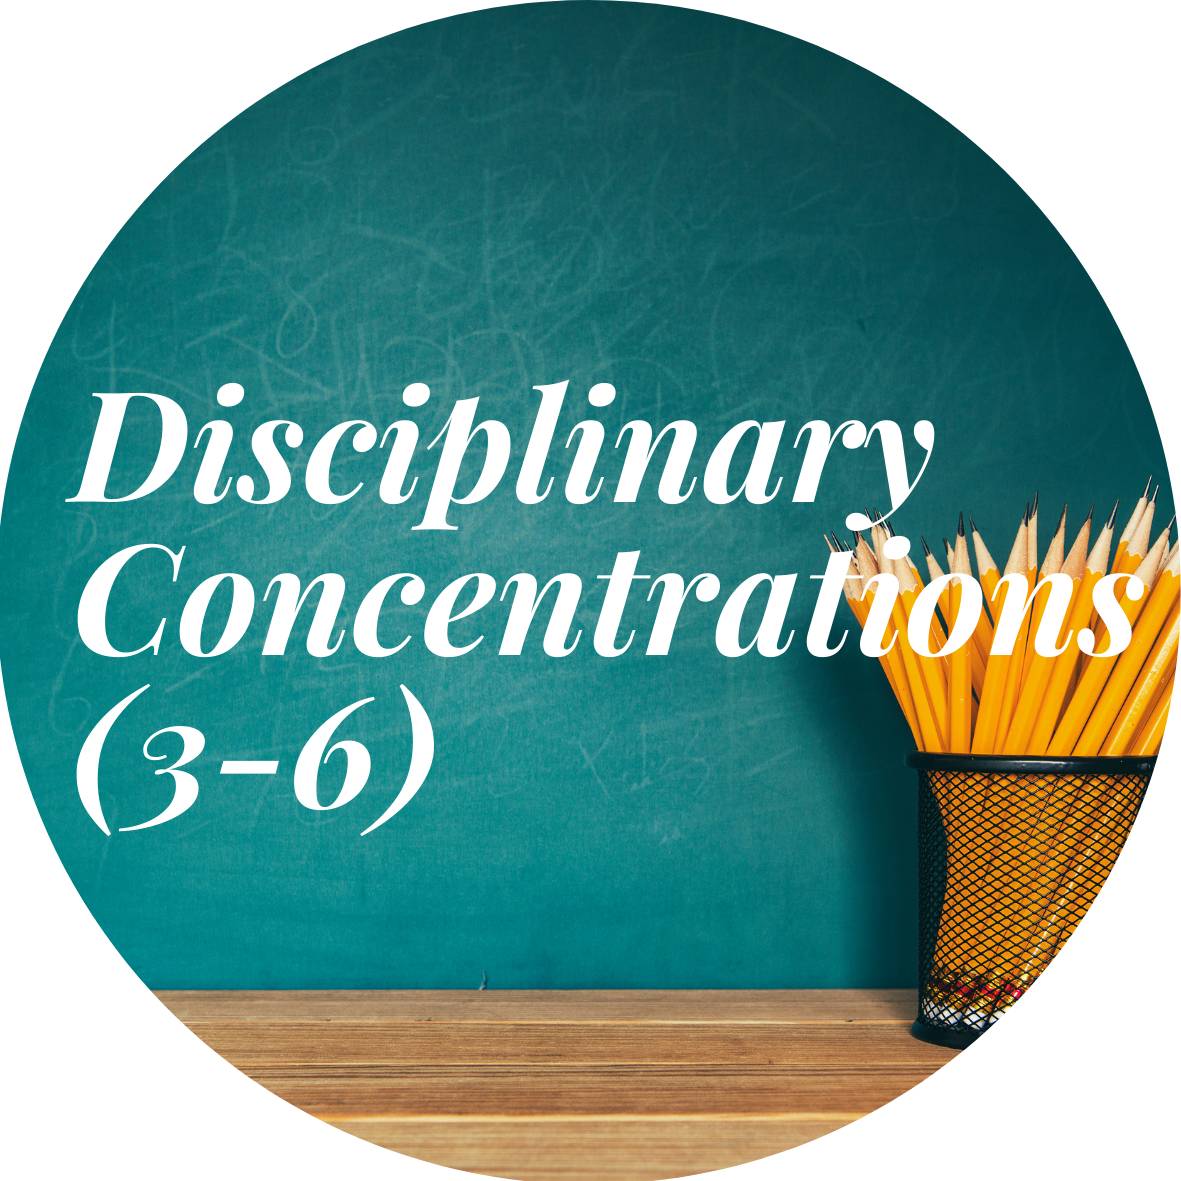 Disciplinary Concentrations (3-6)